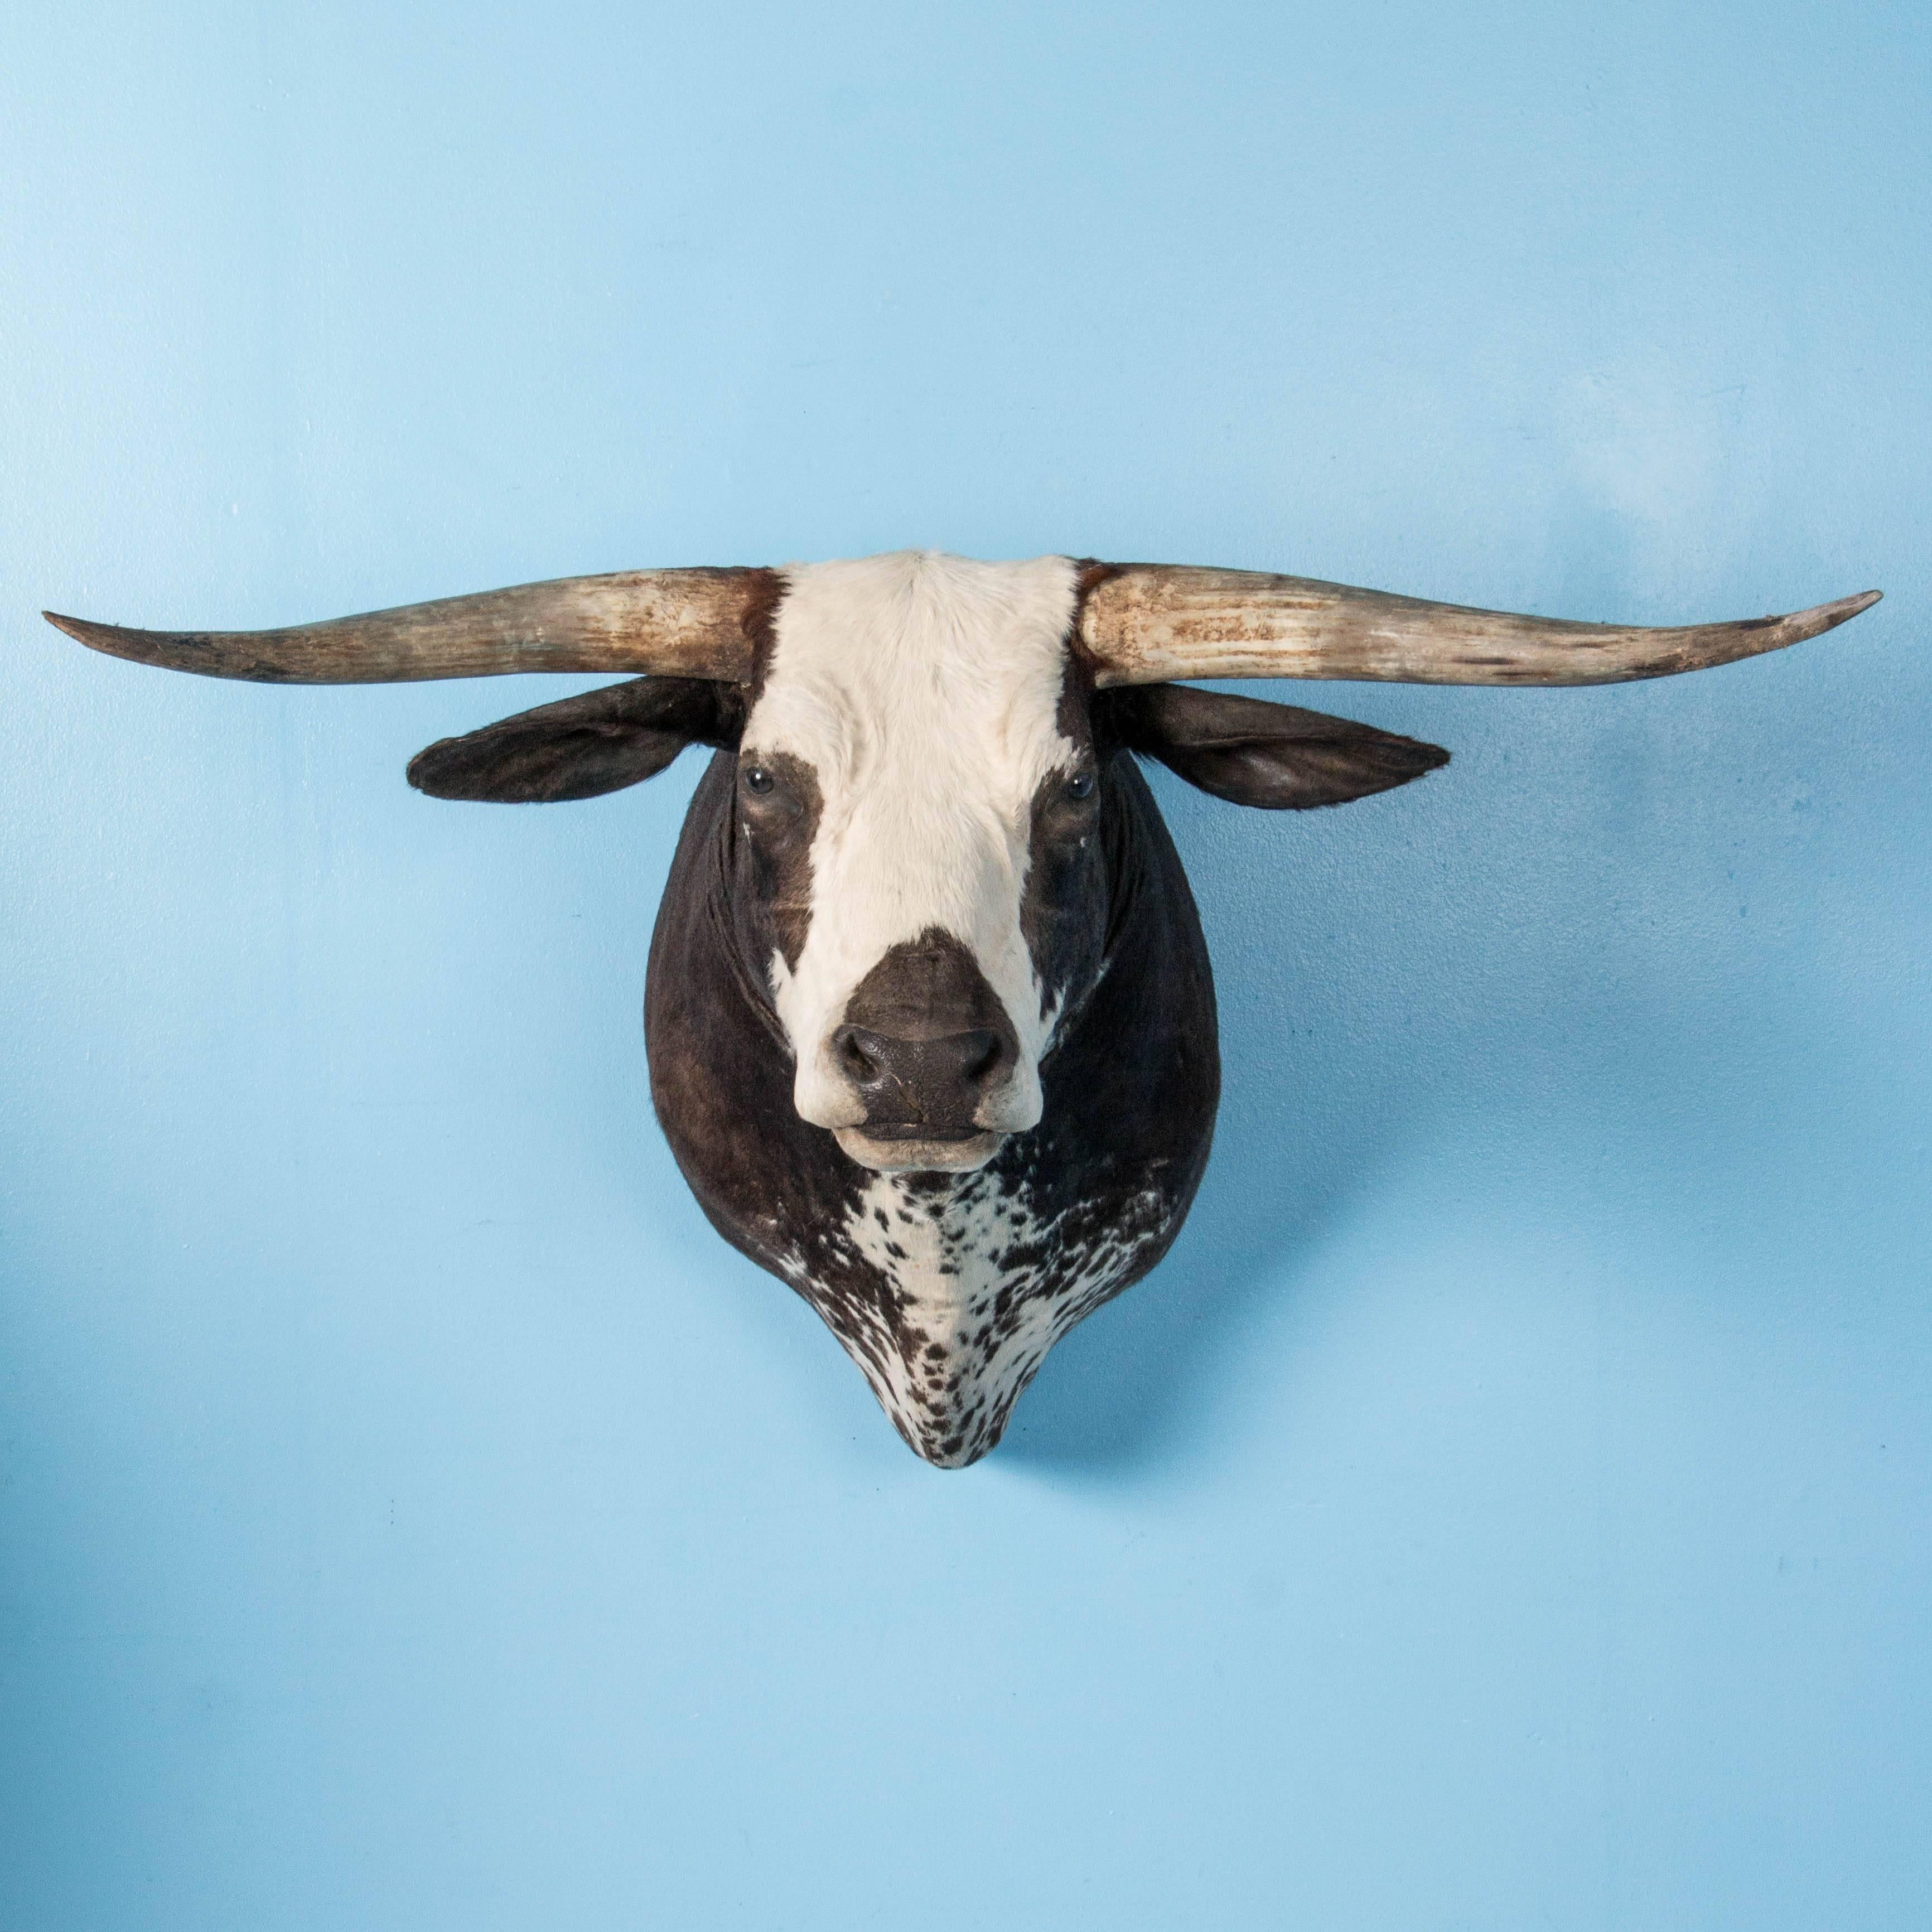 This brown and white steer head mount is very clean, surprisingly lightweight and beautifully mounted with a flat wood backing. Please take a moment to enlarge the photos and examine the details up close.